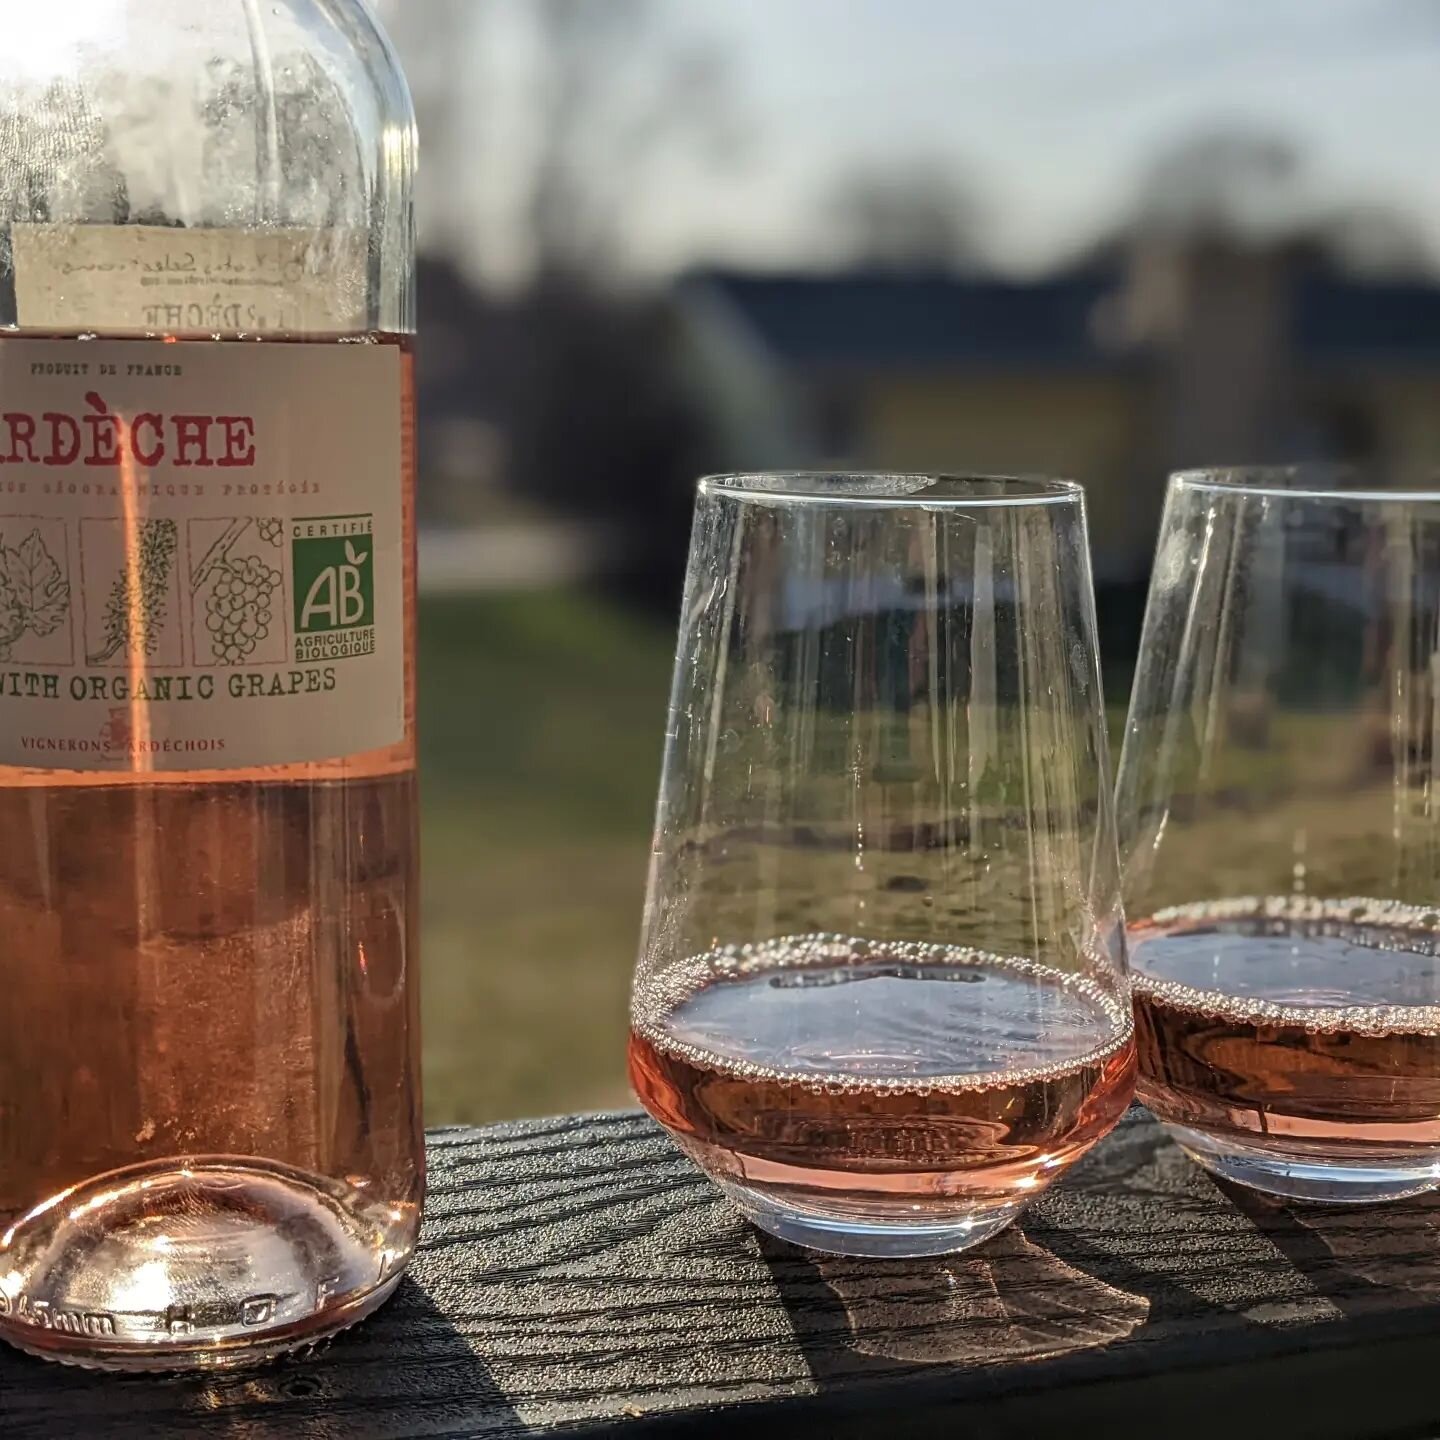 New arrival! The first 2022 French ros&eacute; has hit the warehouse and now has hit the porch.  Fresh and delicious @vignerons_ardechois rose is now available! #onlythegoodstuff #naturalwineforiowa